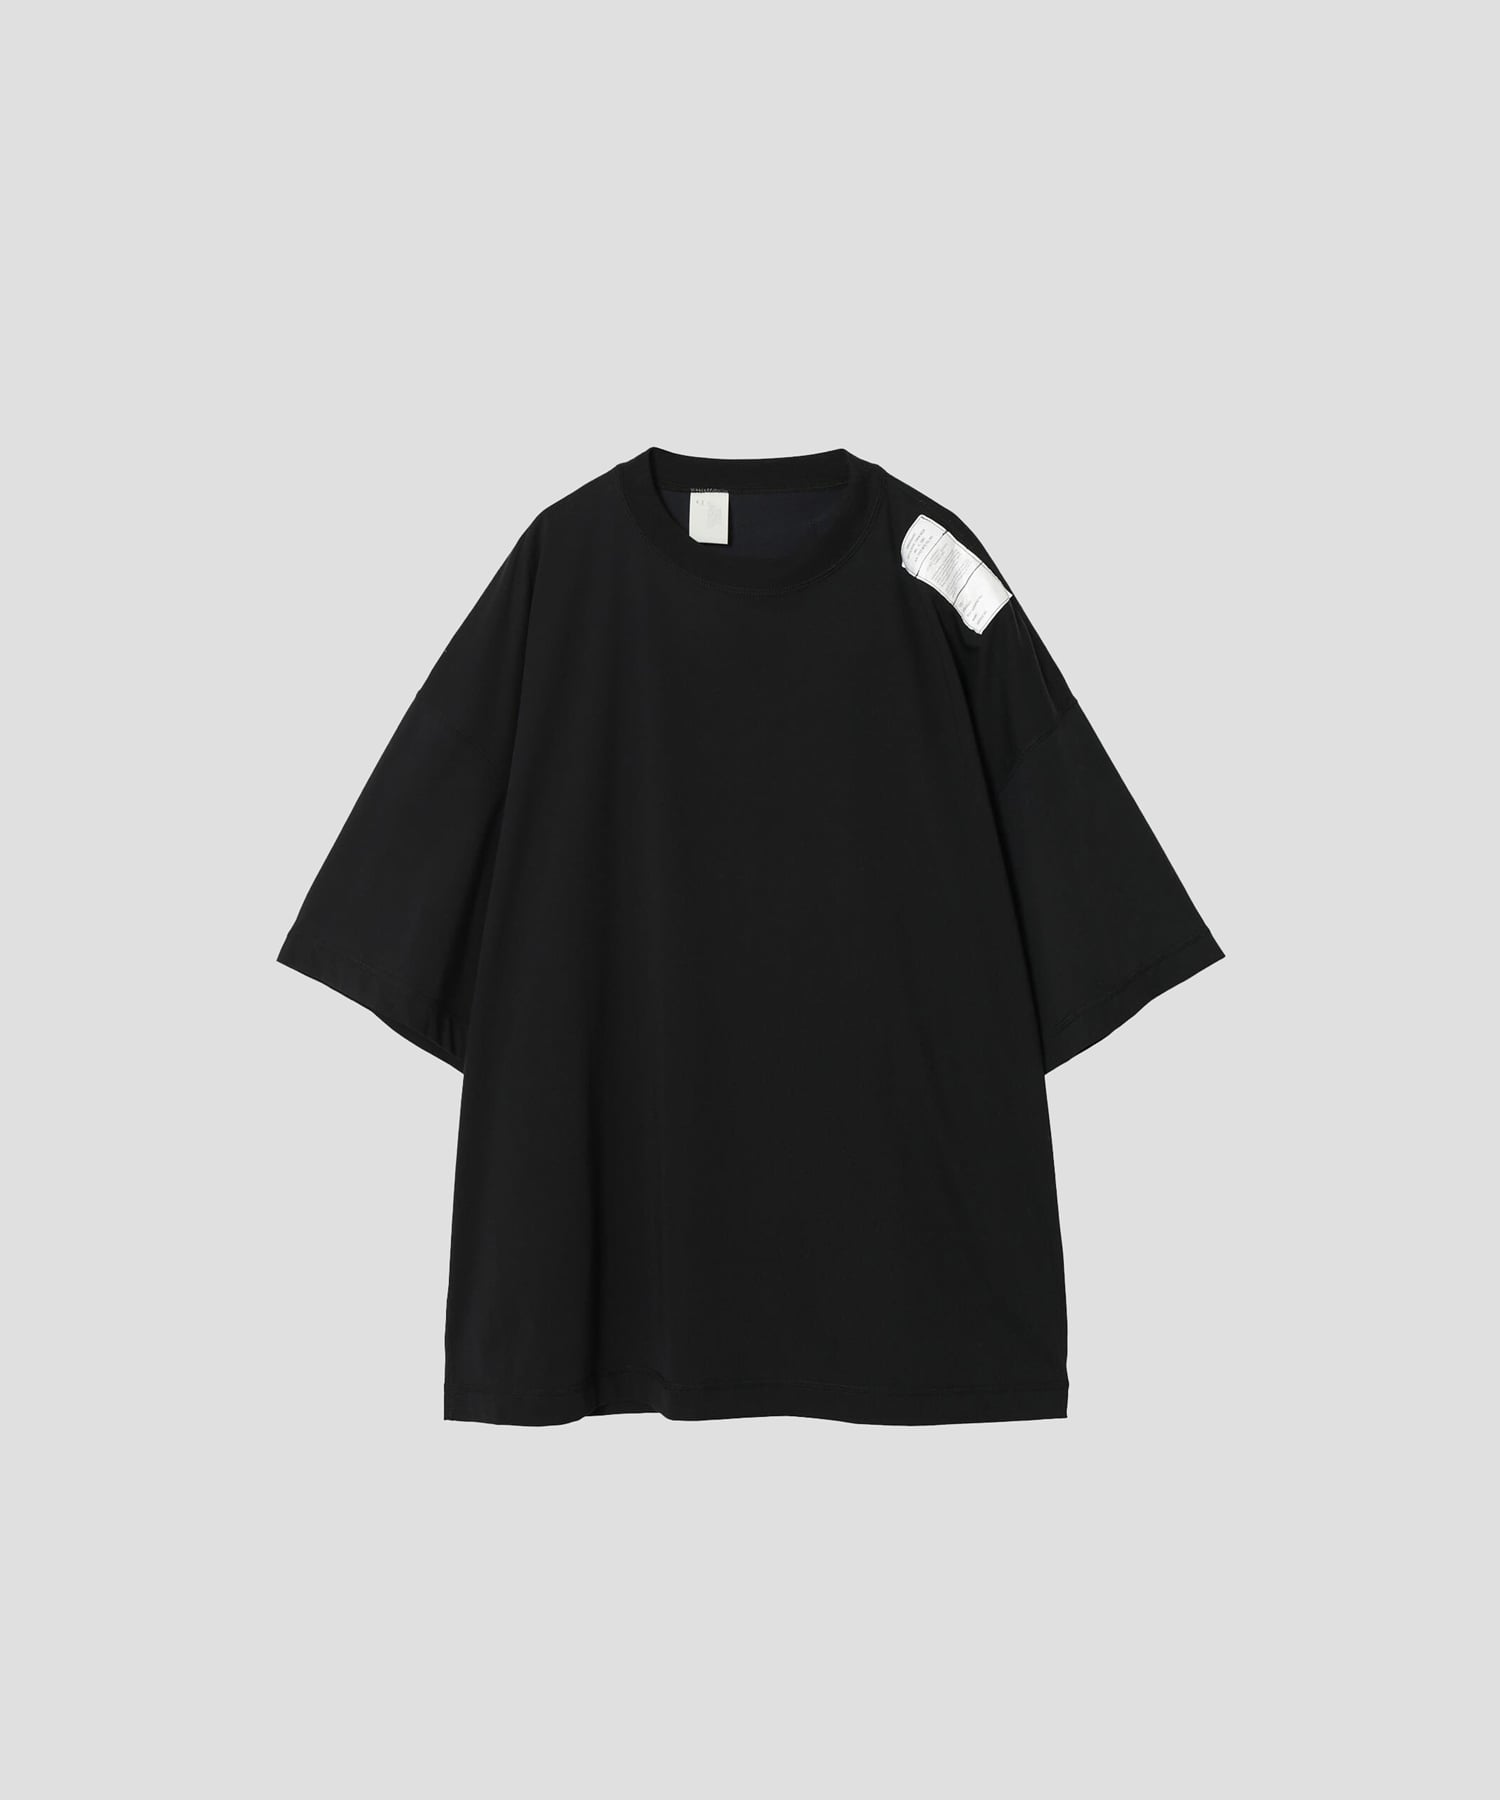 TPES S/S Tee